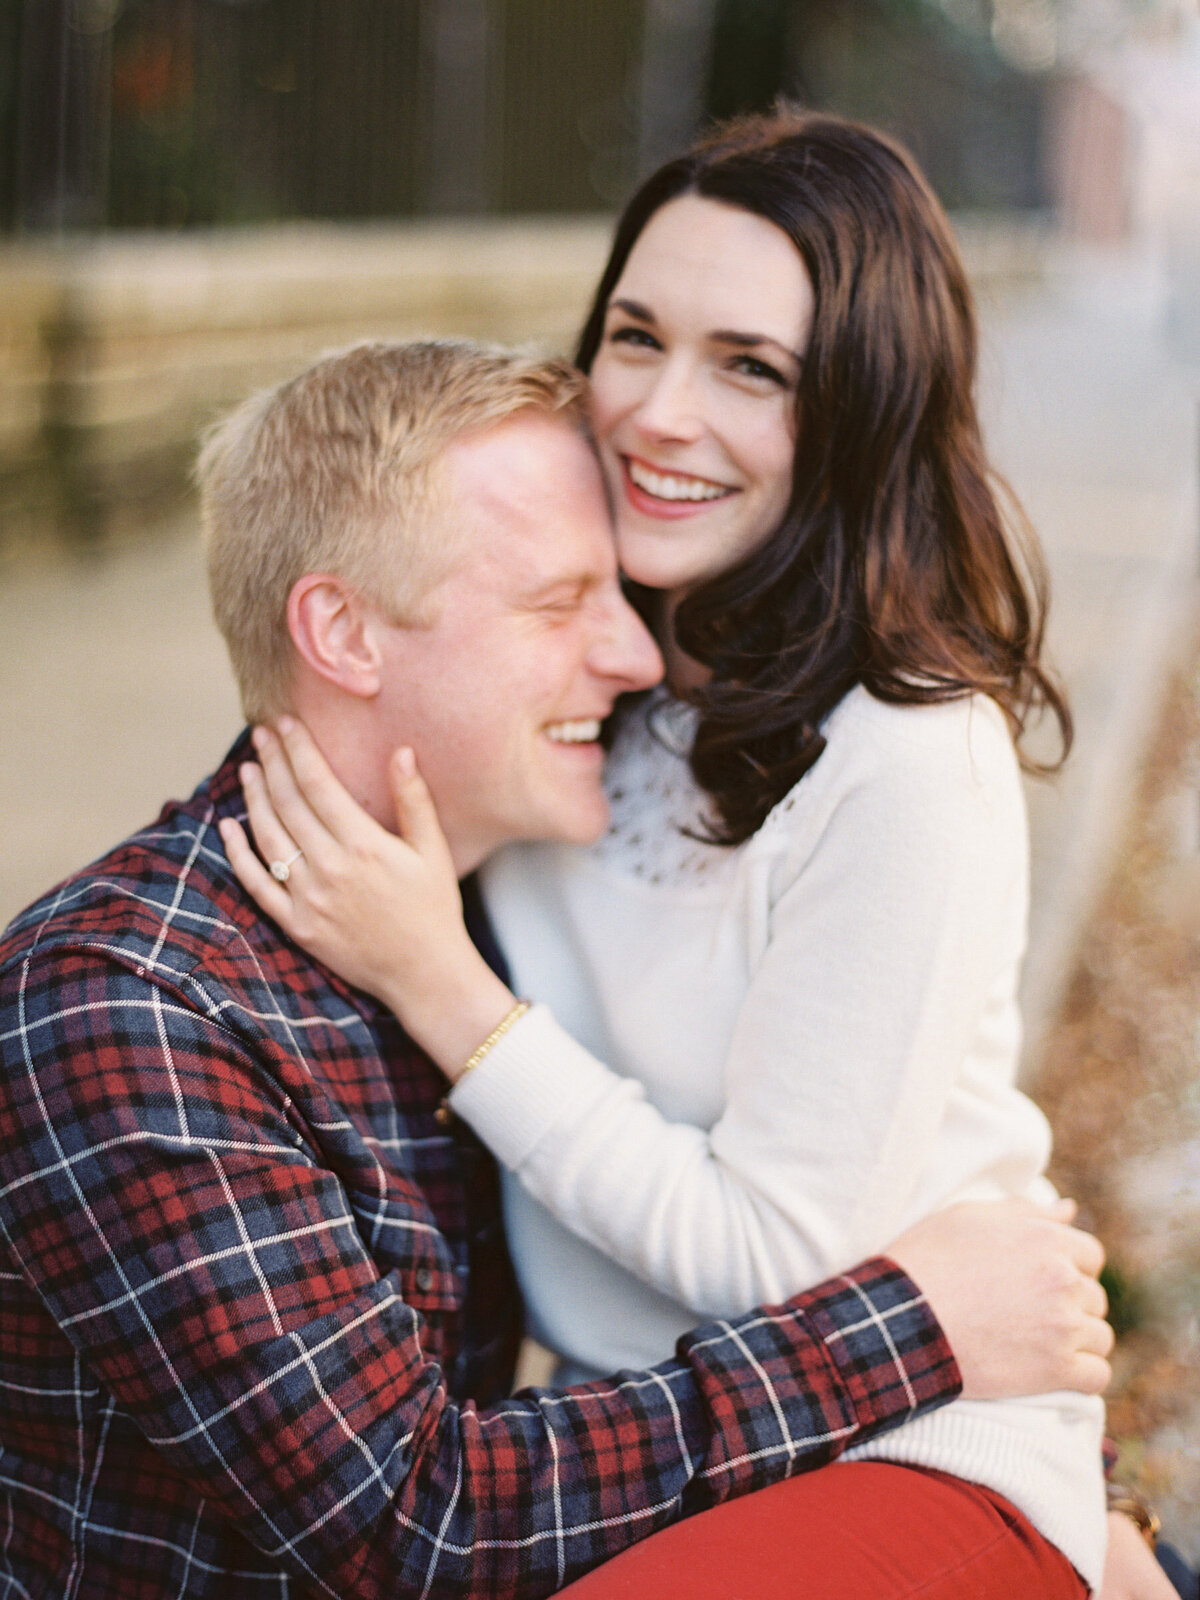 charleston-fall-engagement-photos-by-philip-casey-018